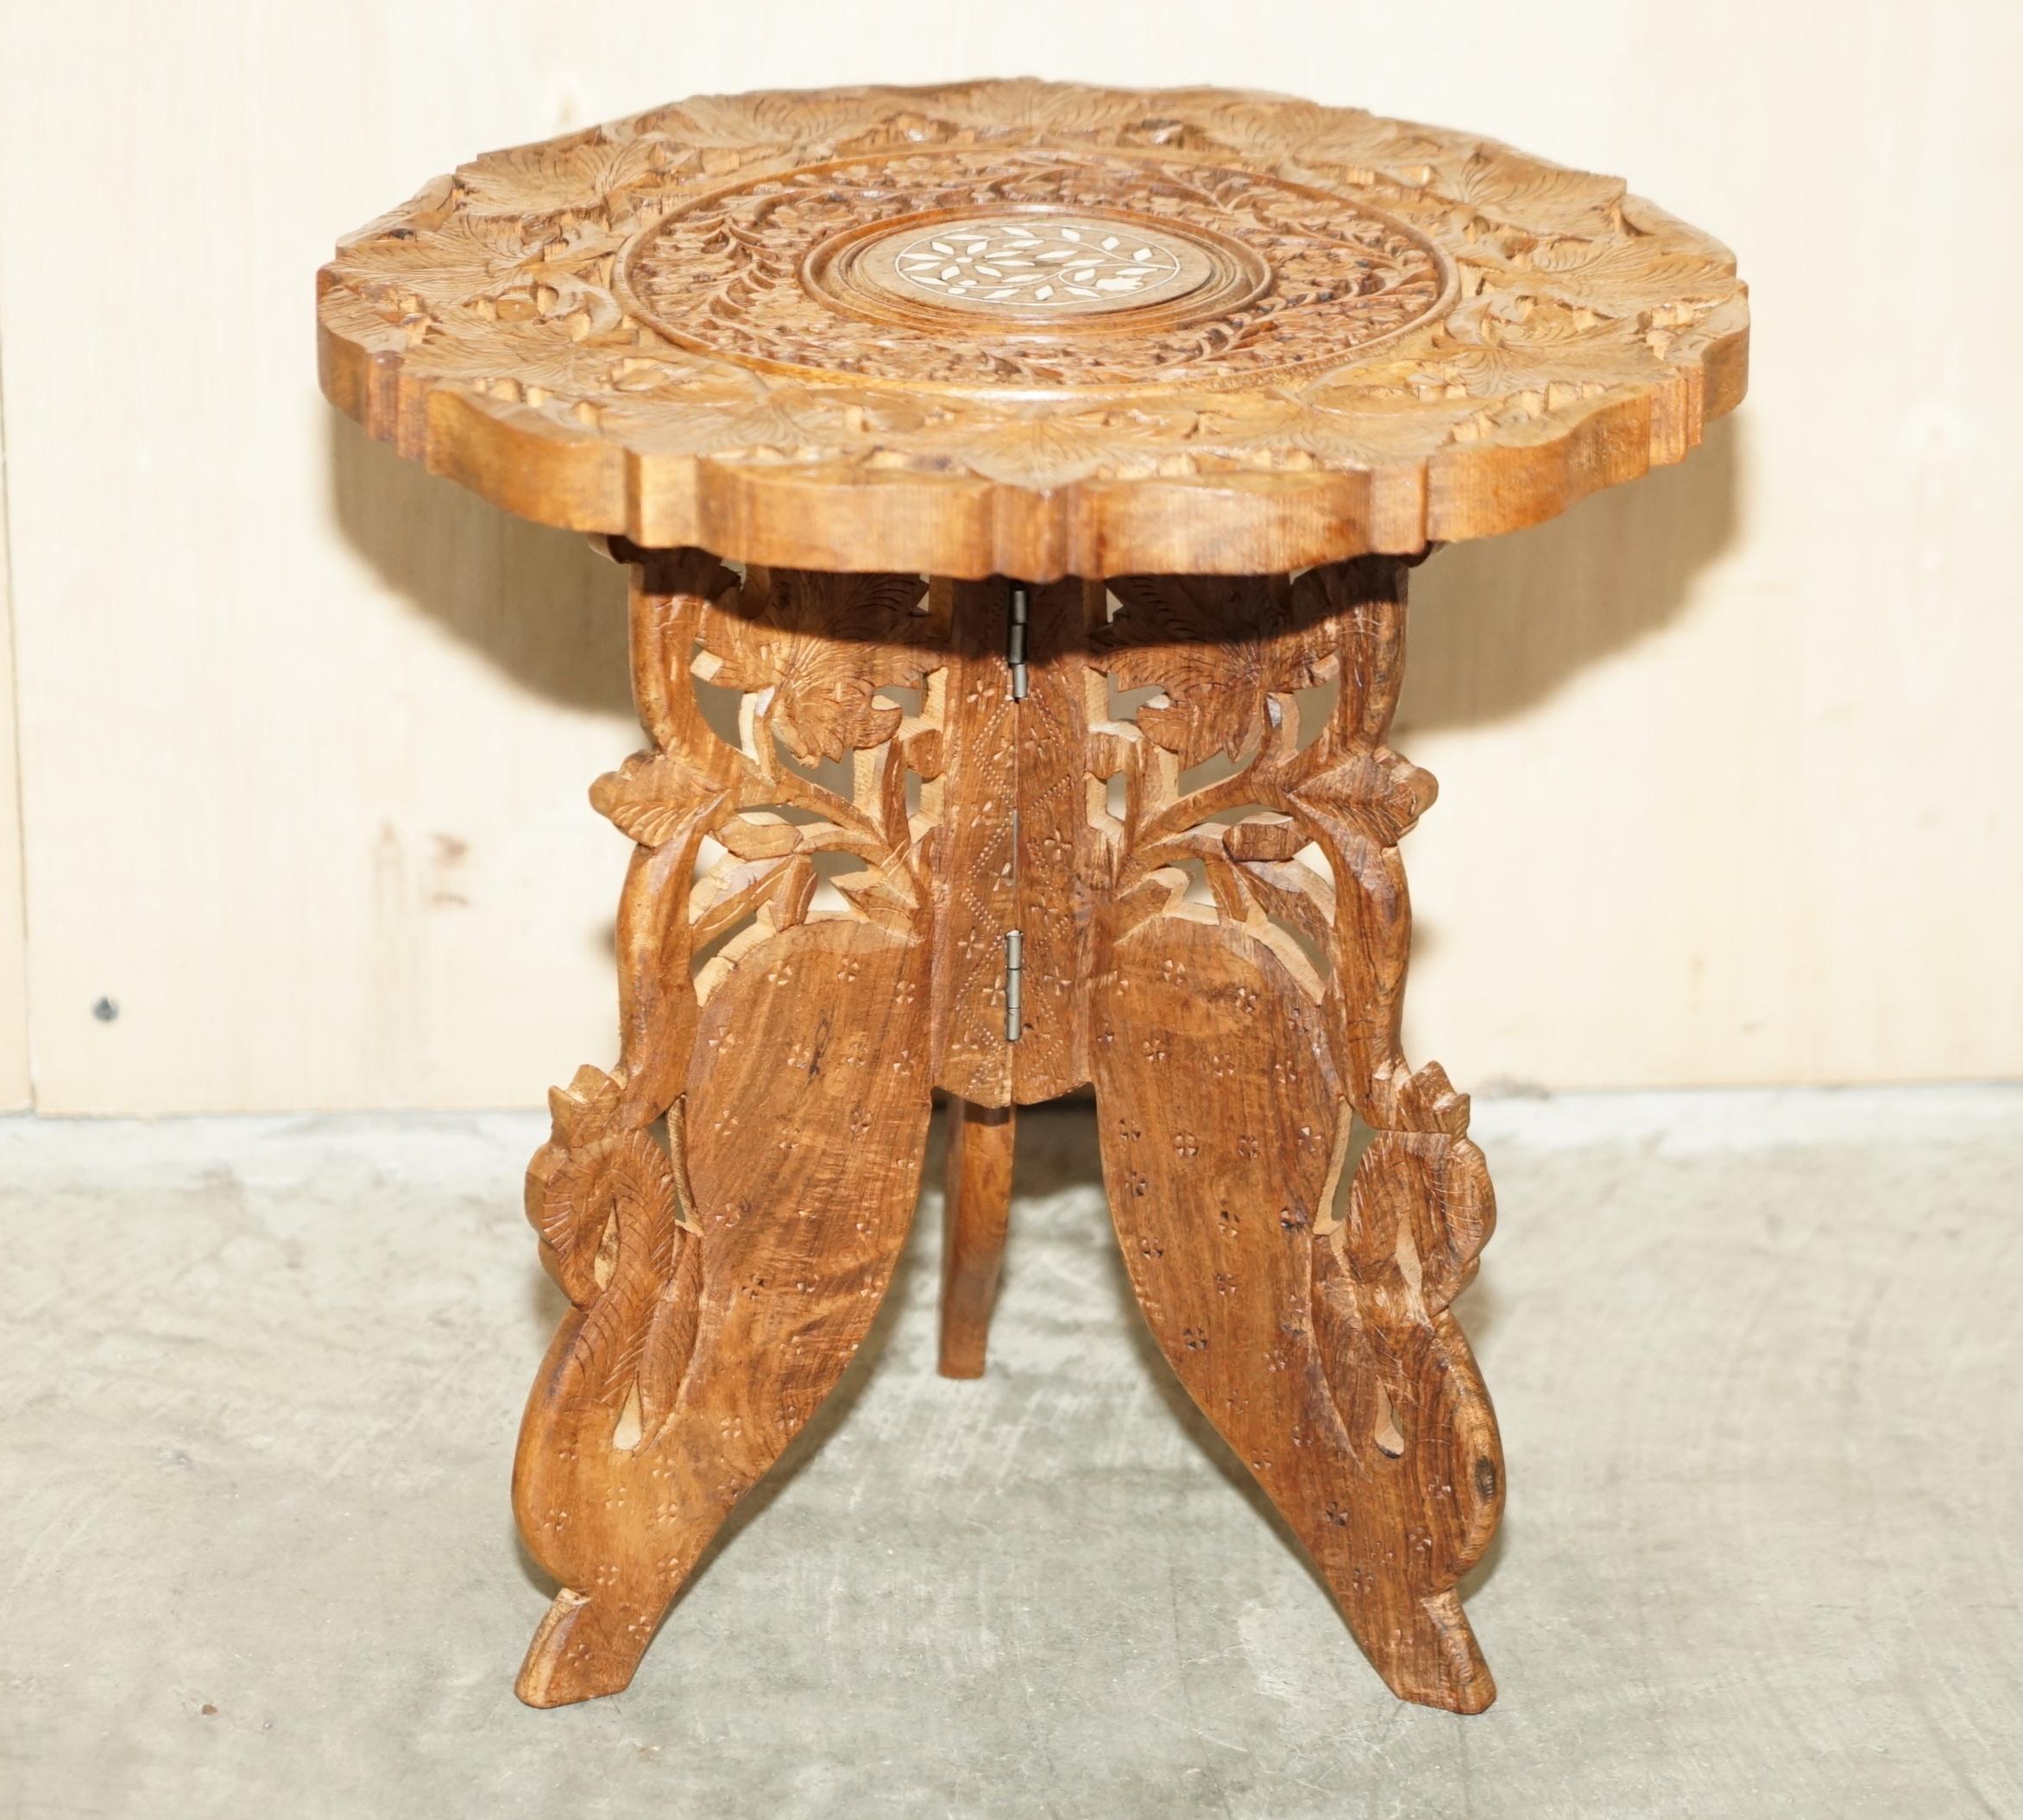 We are delighted to offer for sale this lovely hand carved from solid Rosewood Burmese side table. 

A very good looking and decorative table, this would be used as a lamp wine or side table.

Carved from top to bottom with leaves and vines this